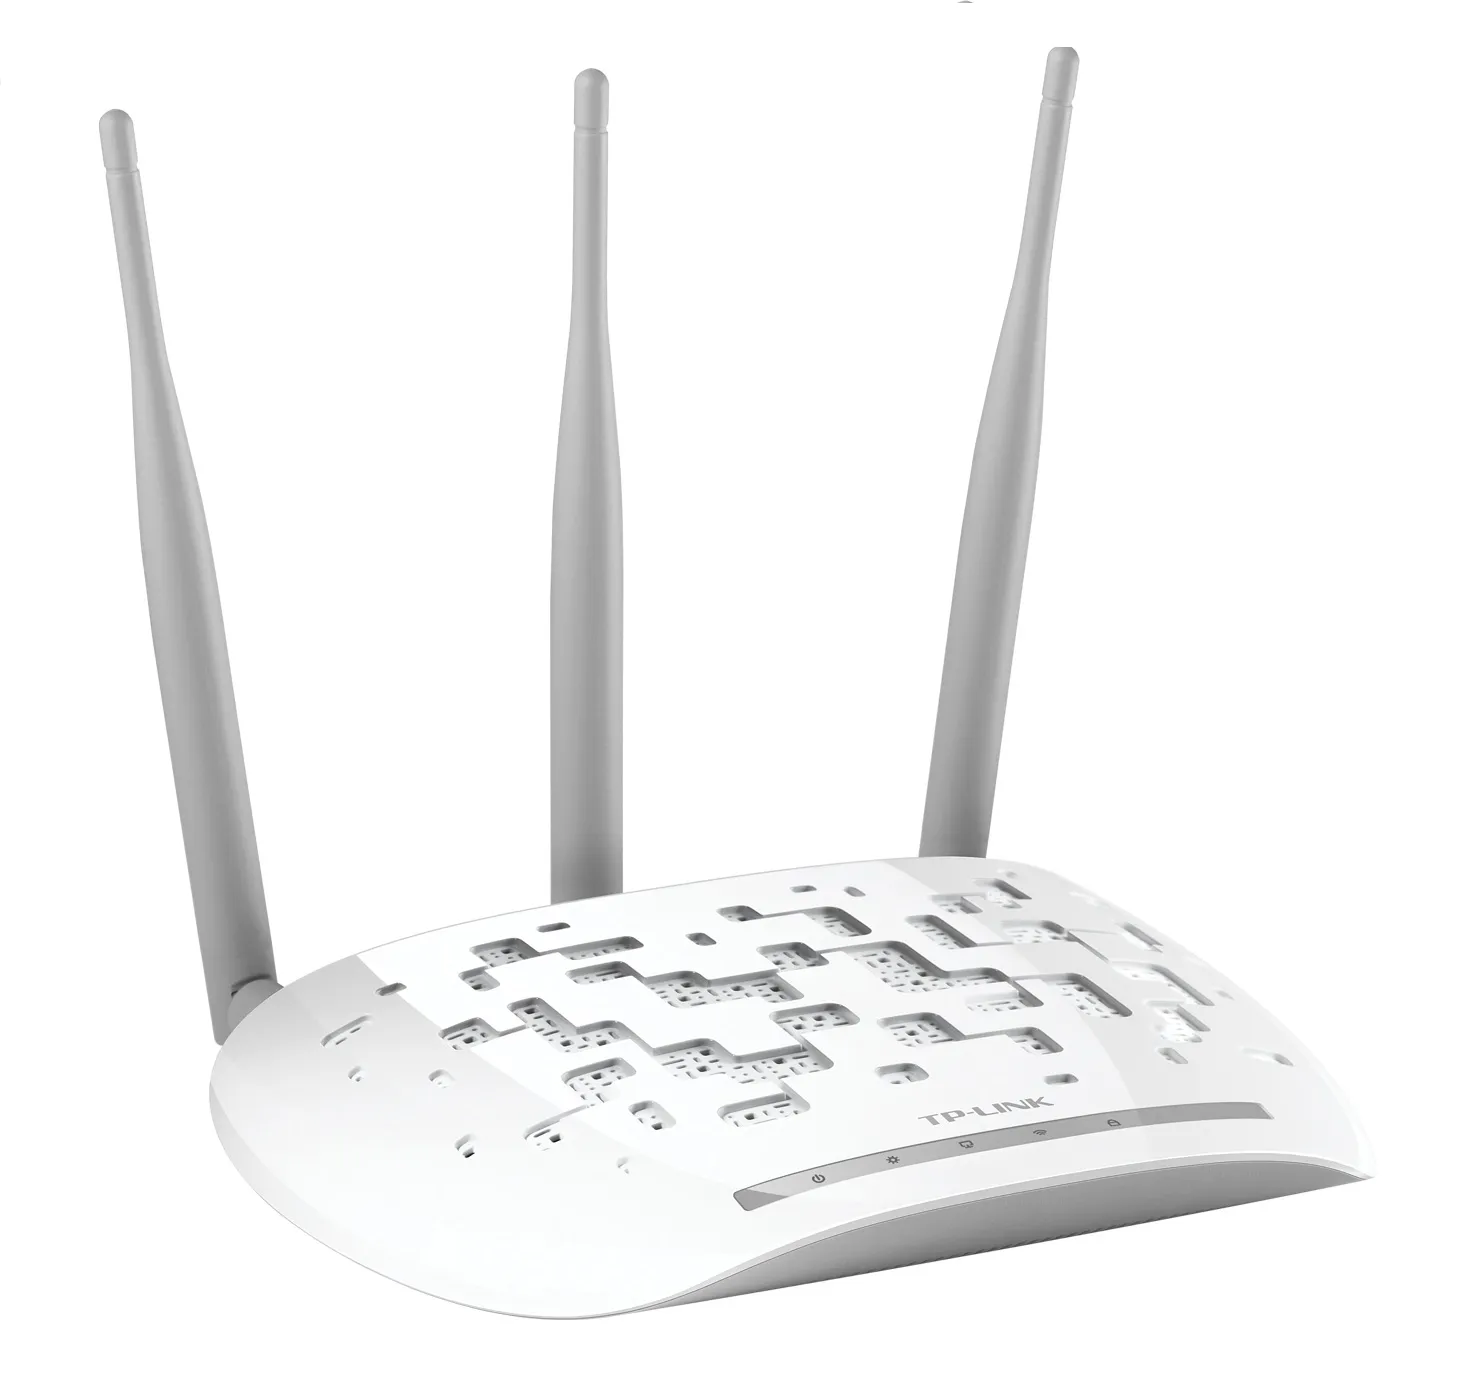 WiFi точка доступа TL-WA901ND 450M Advanced Wireless N Access Point, Qualcomm, 2.4GHz, 802.11b/g/n, Passive PoE Supported, AP/Client/Bridge/Repeater, Multi-SSID, 3 detachable antennas#1